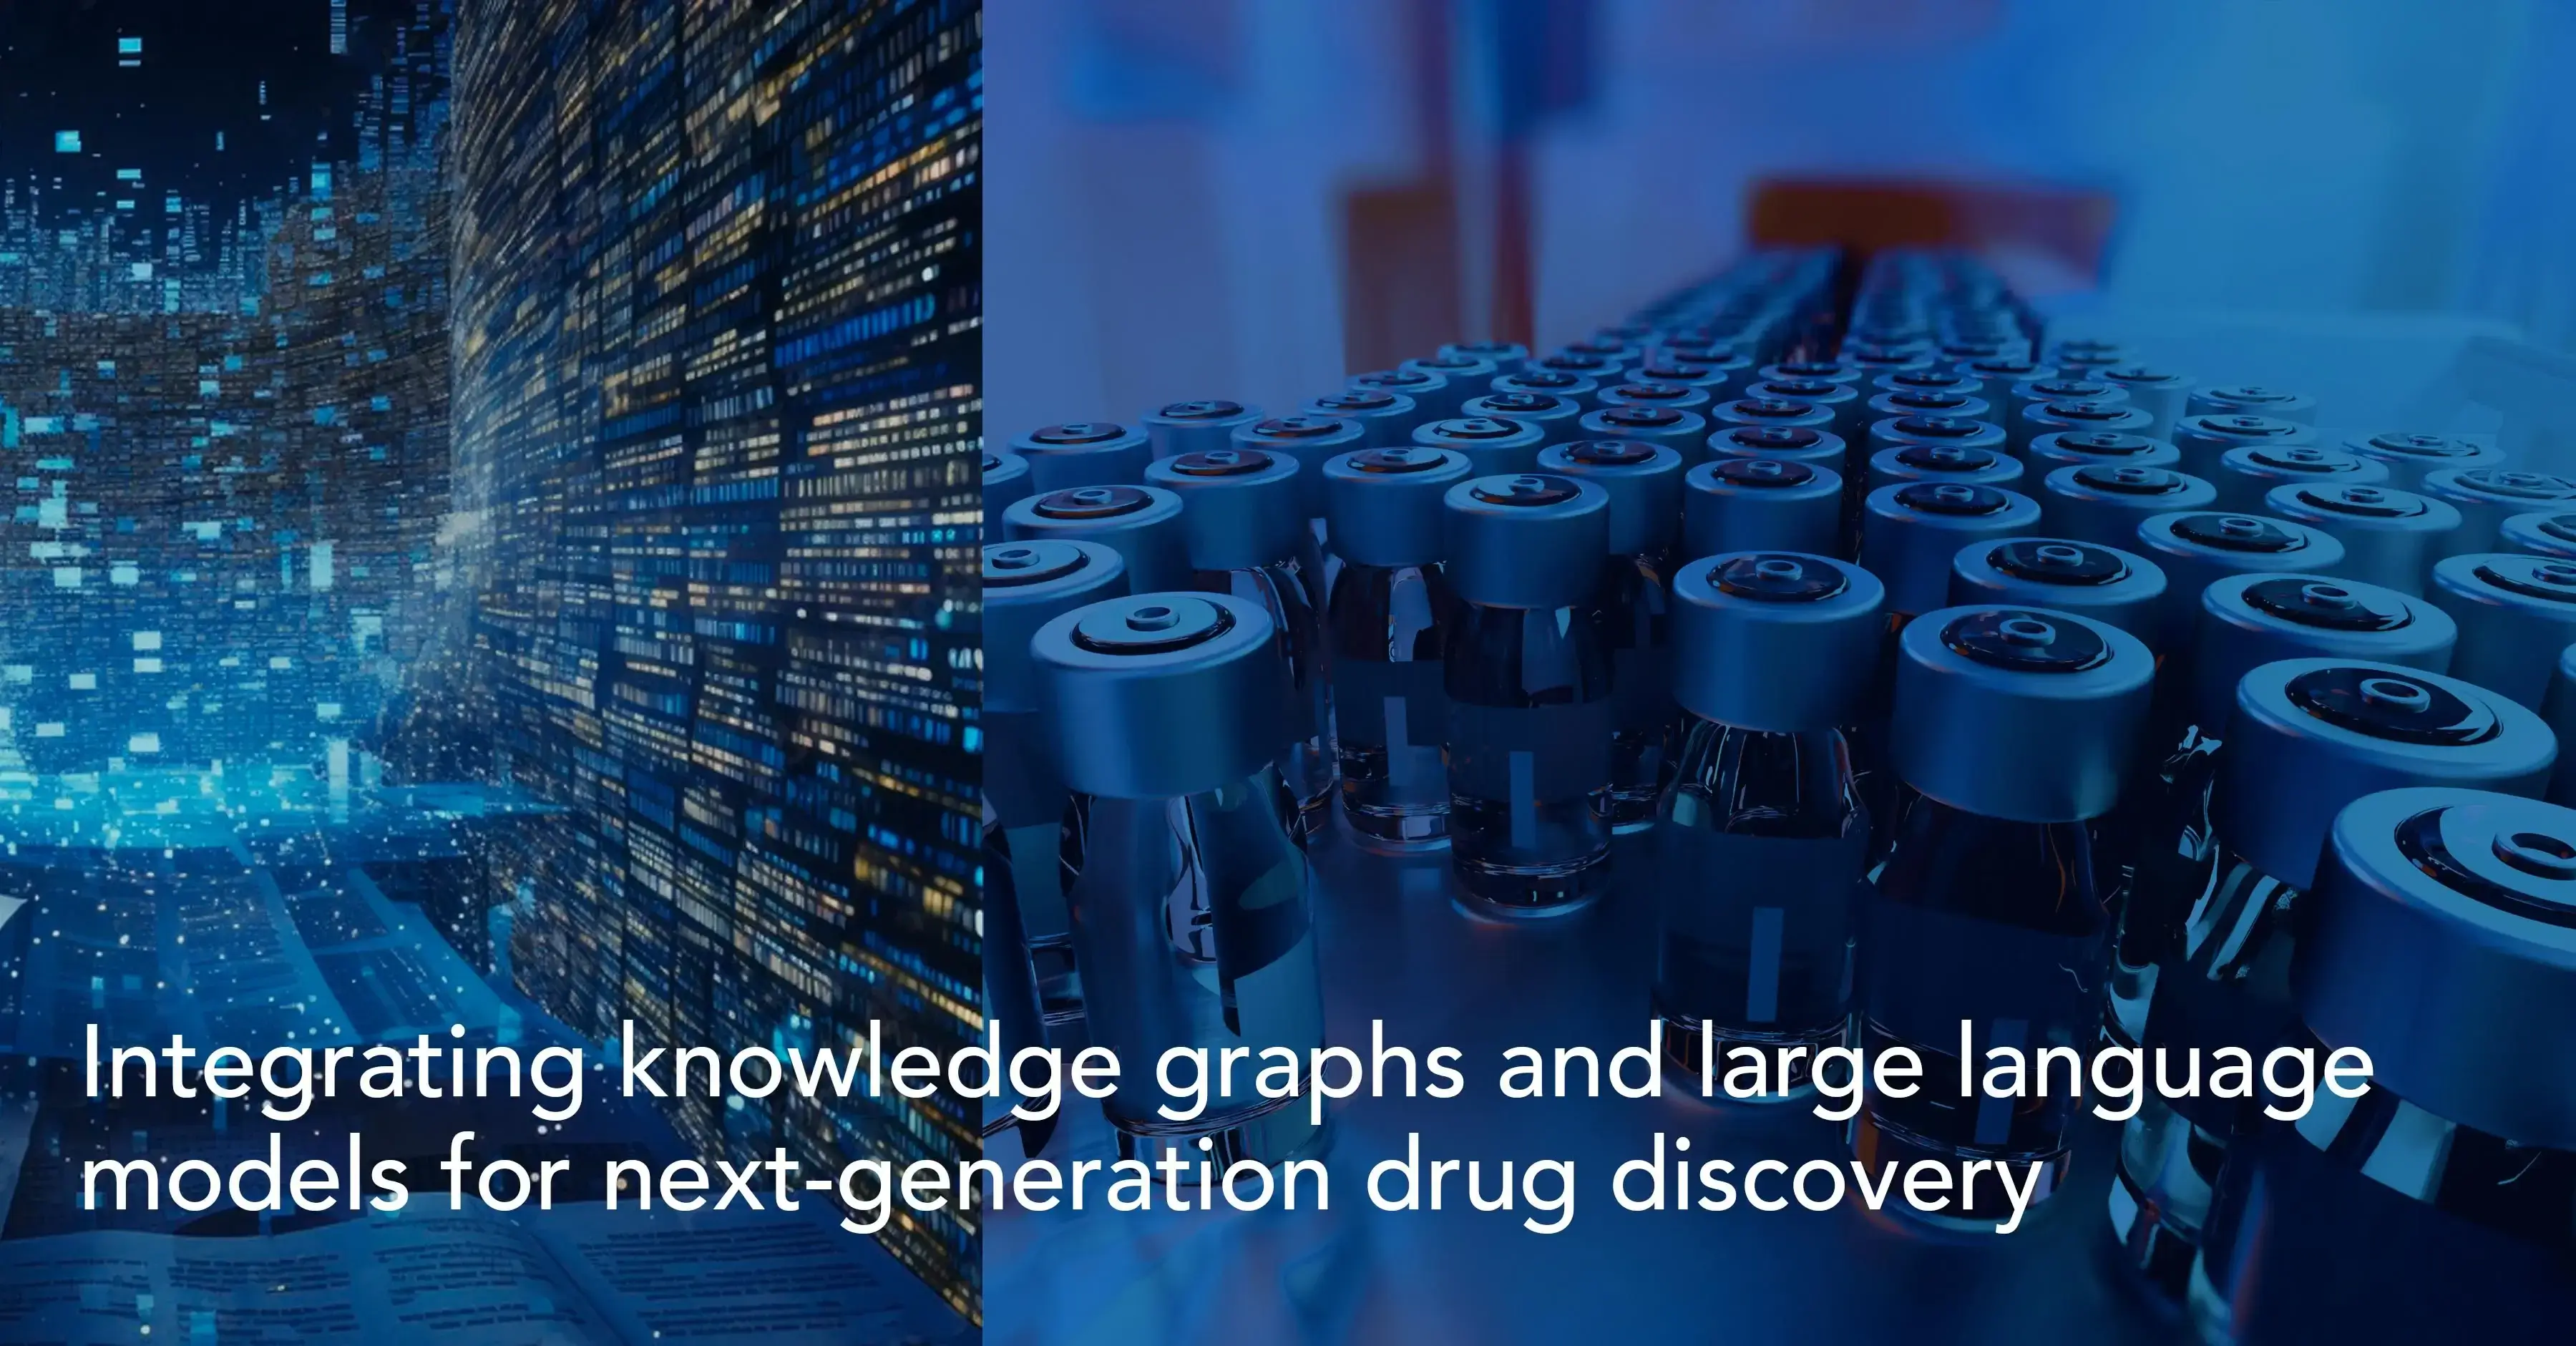 Integrating knowledge graphs and large language models for next-generation drug discovery